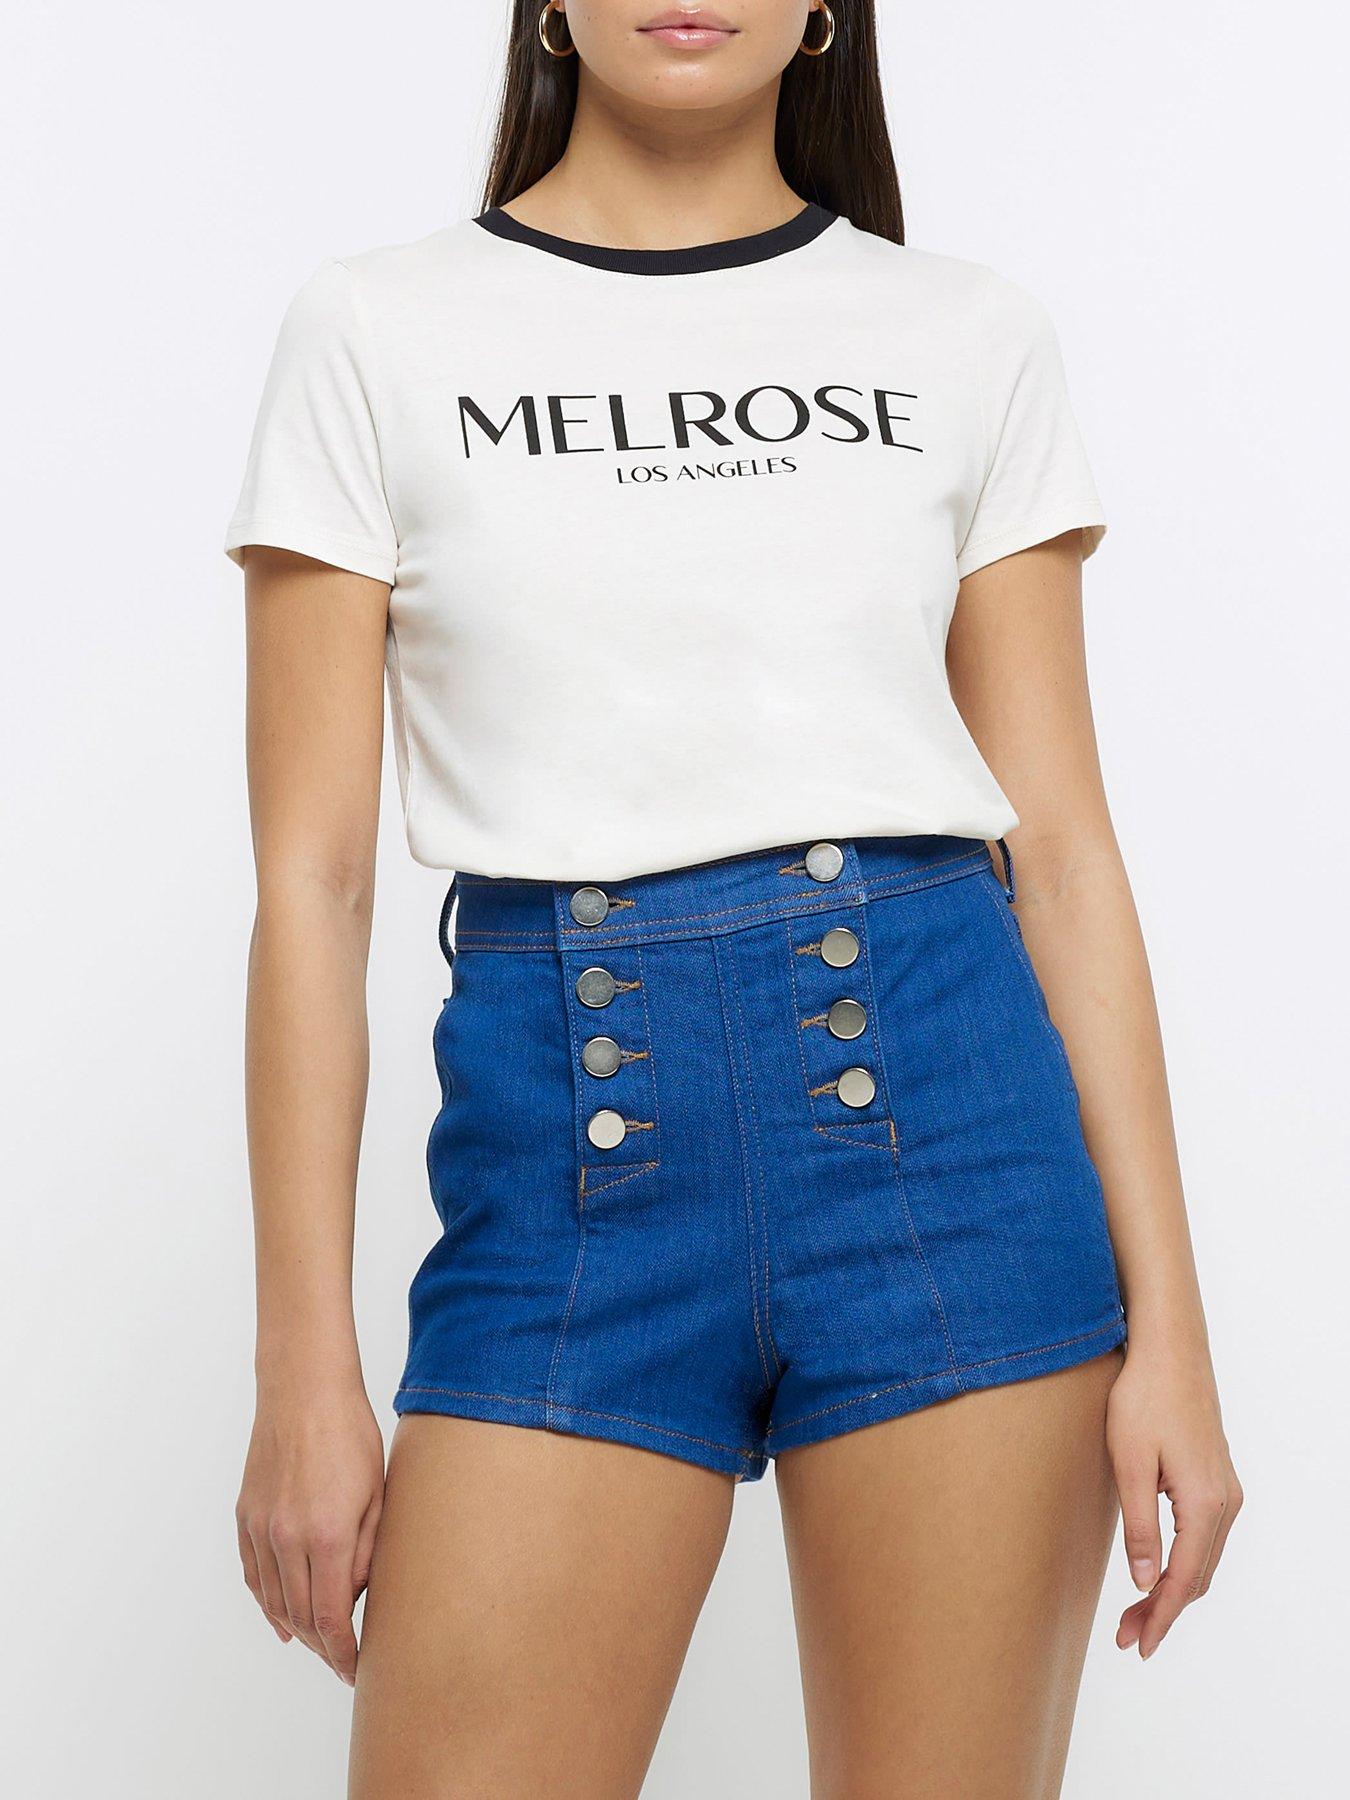 River Island Women's Shorts, Free Delivery